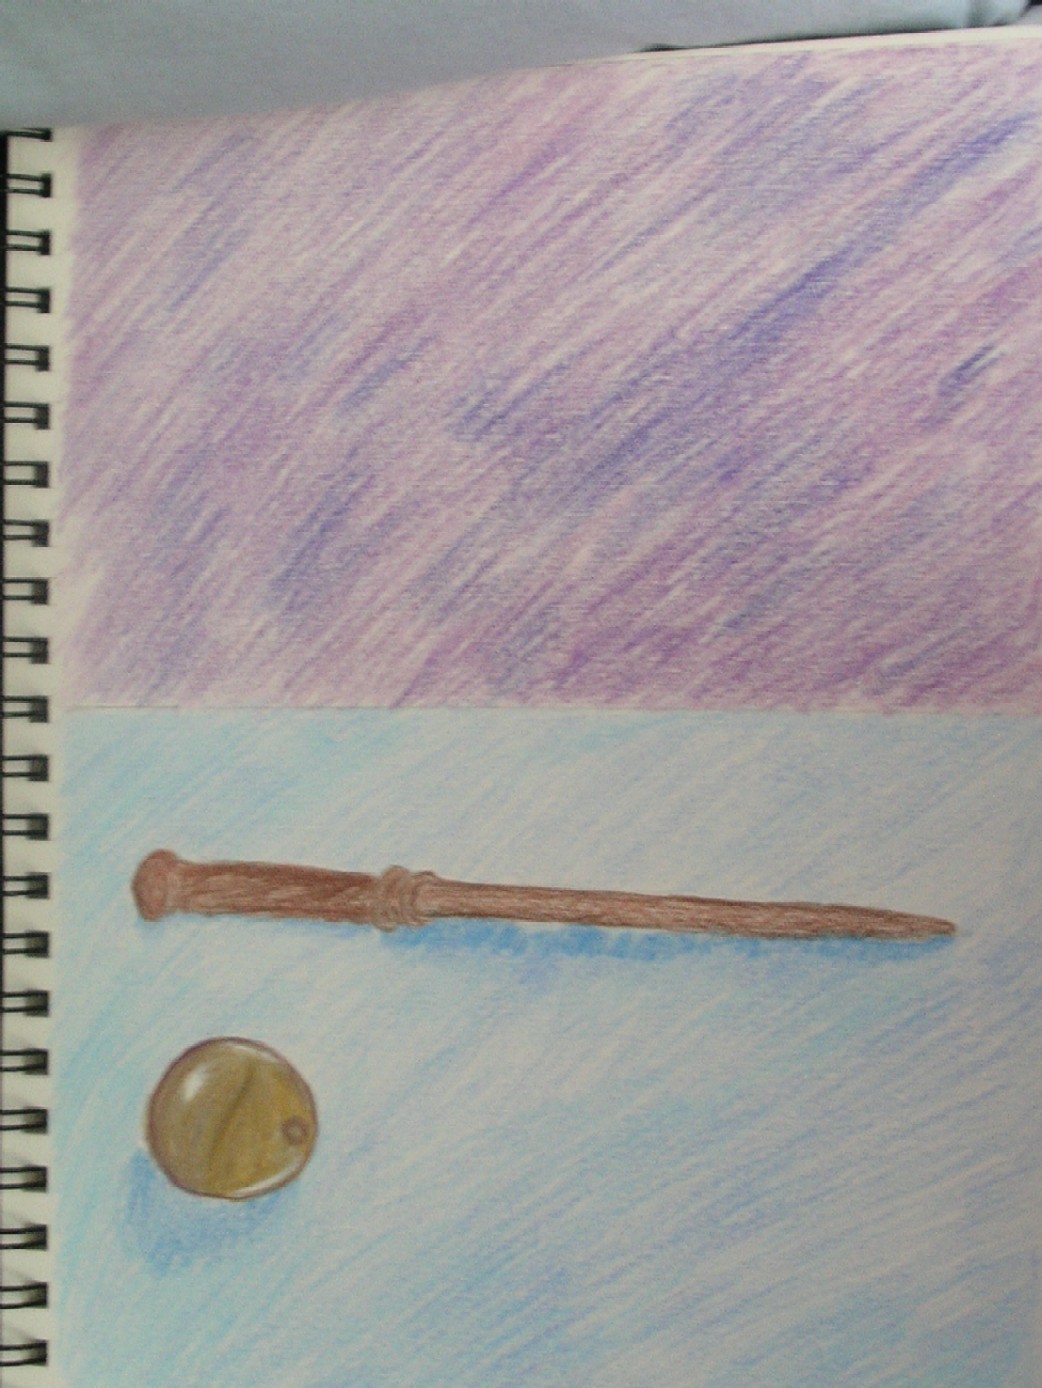 Harry Potter Wand and Golden Snitch by Mike_Dirnt_Obsessed